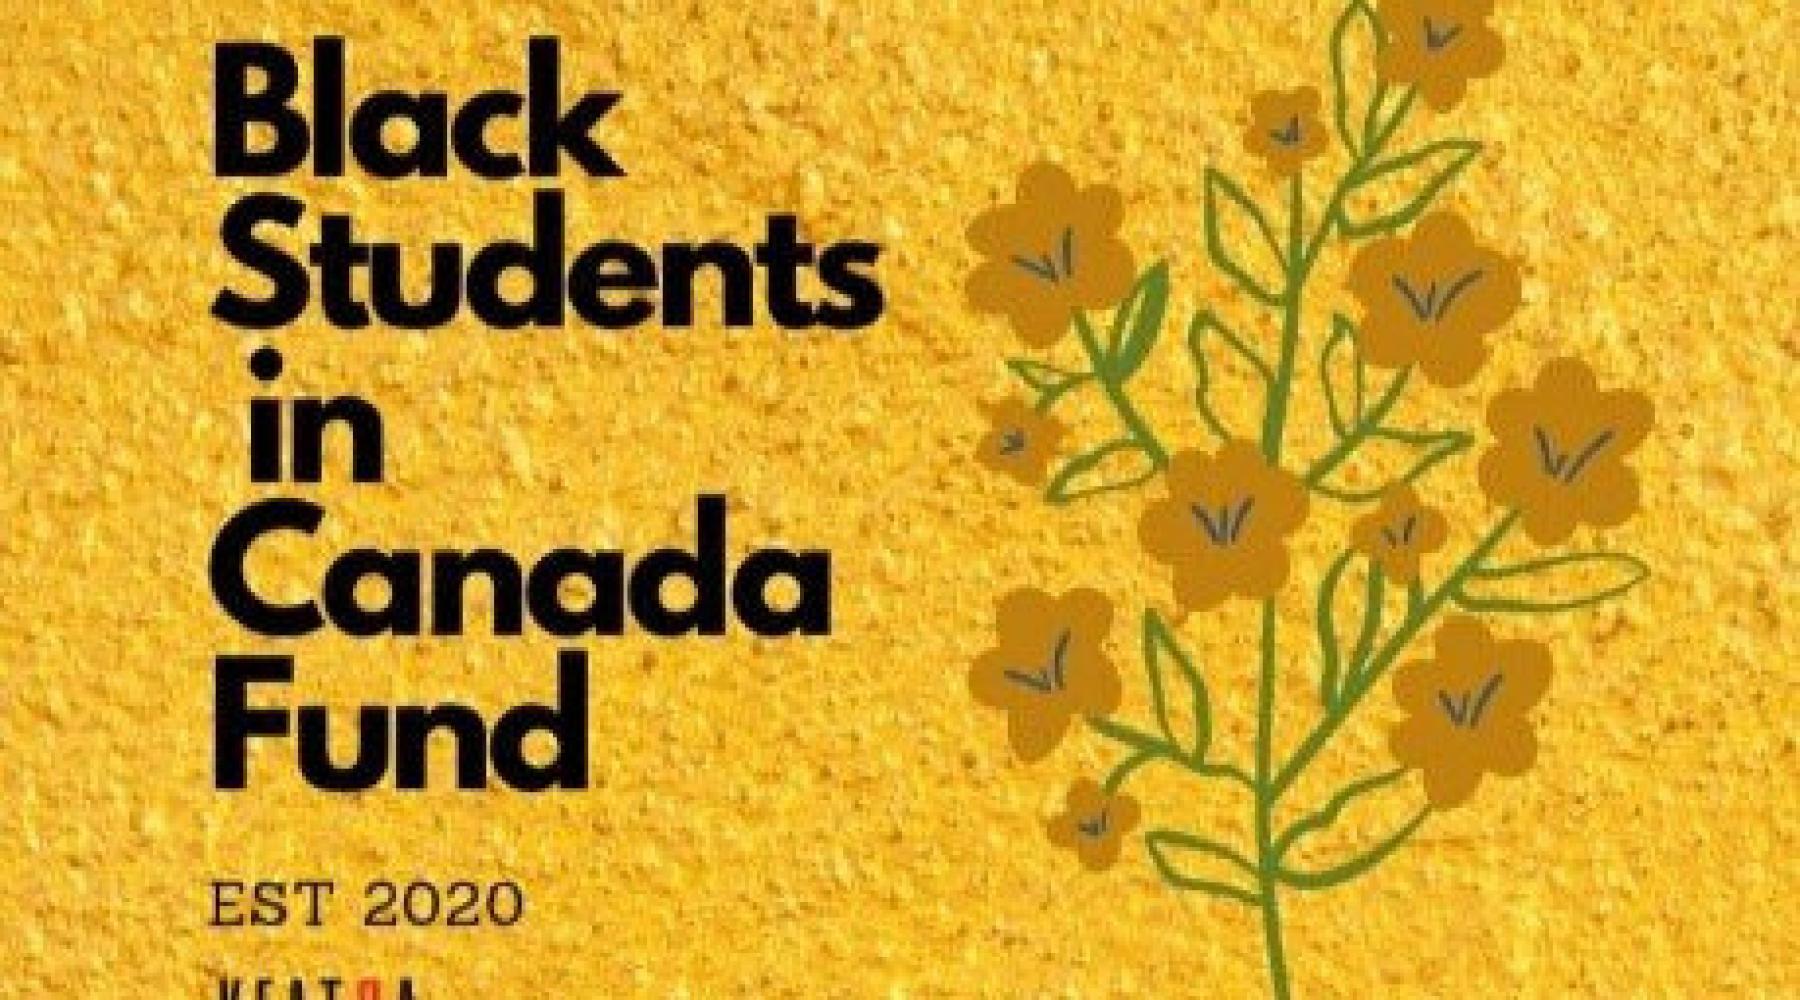 Black Students in Canada bold text with flower image